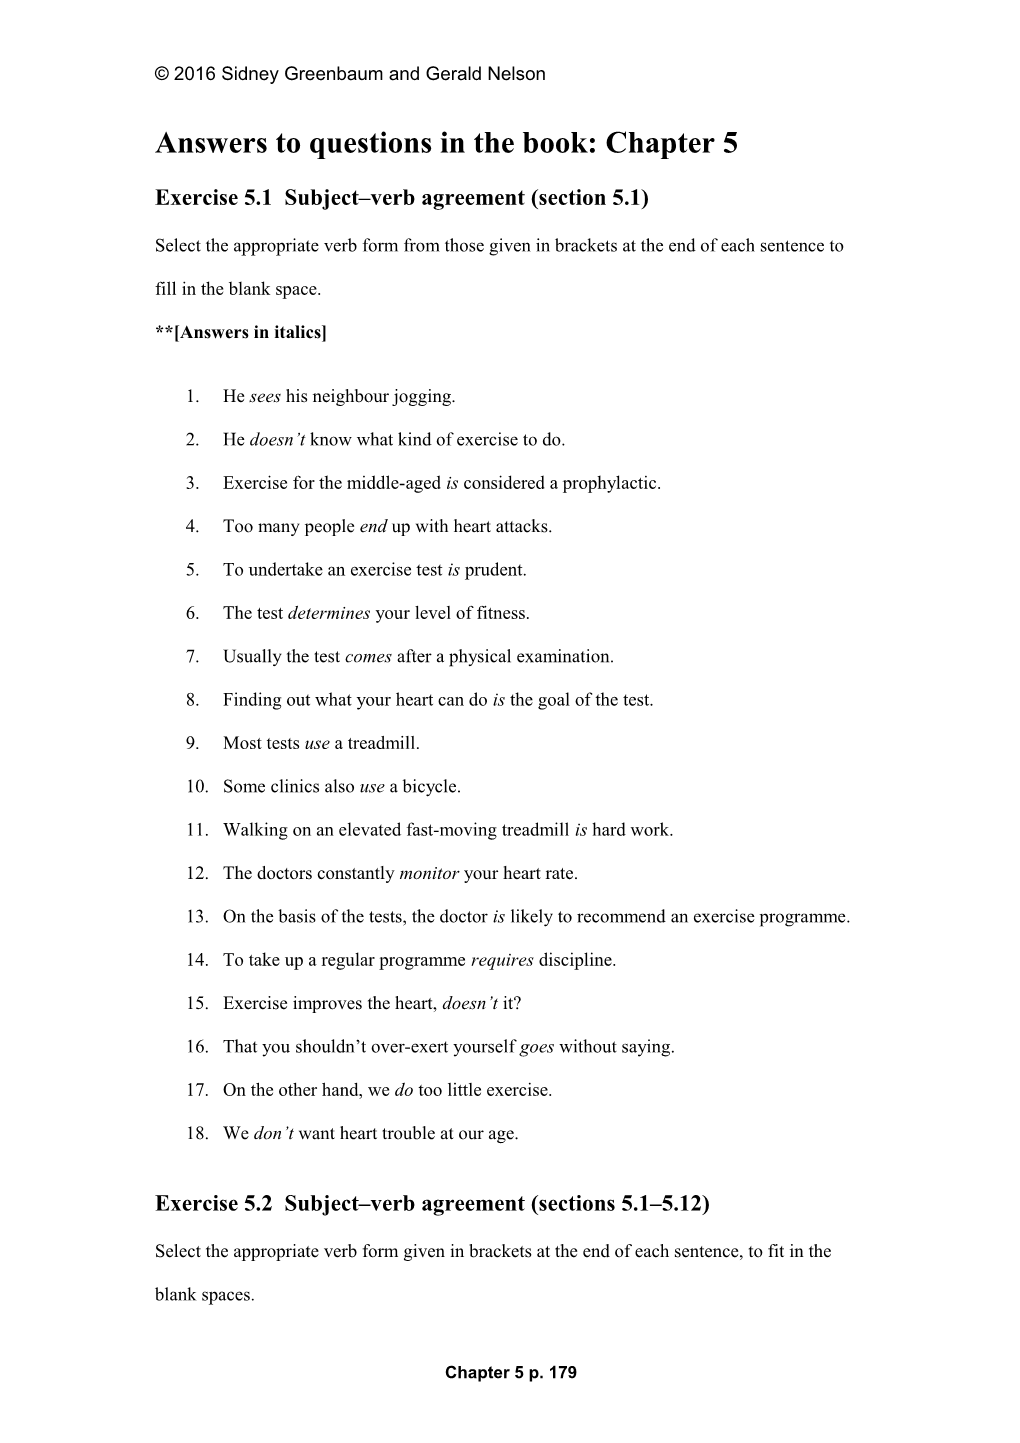 Answers to Questions in the Book: Chapter 5